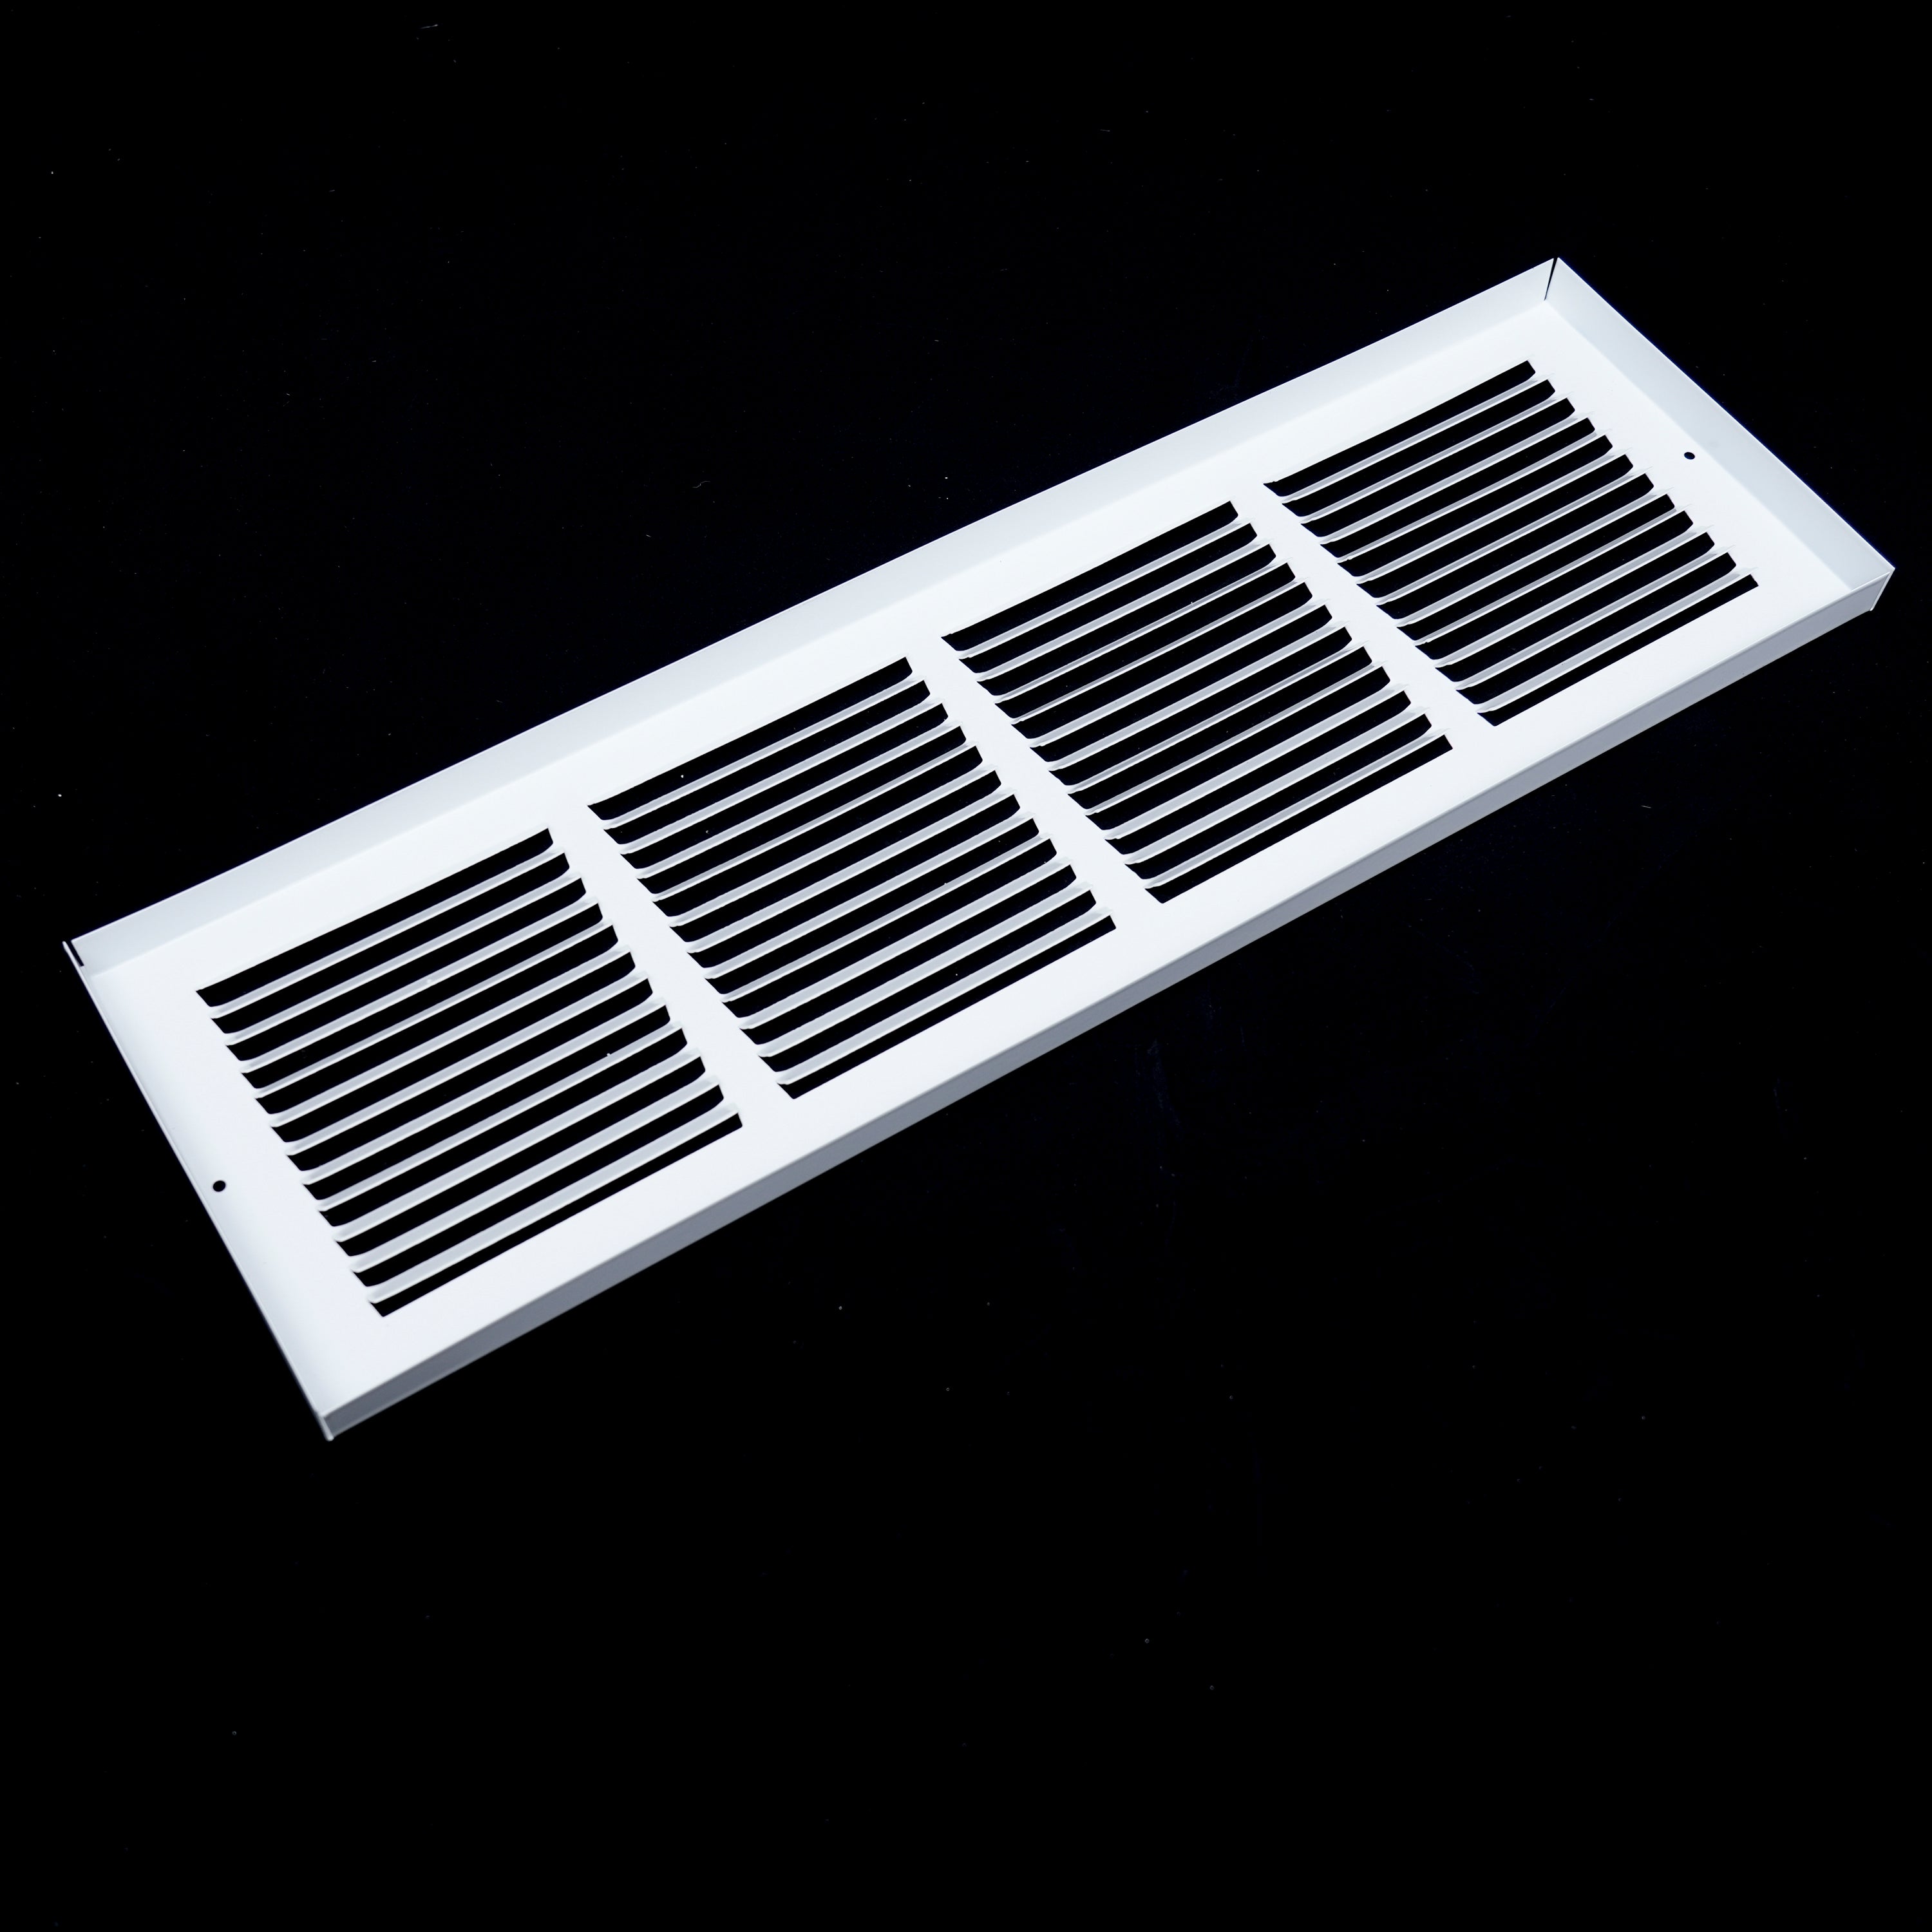 24"W x 6"H  Baseboard Return Air Grille | Vent Cover Grill | 7/8" Margin Turnback to Fit Baseboard | White | Outer Dimensions: 25.75"W X 7.75"H for 24x6 Duct Opening